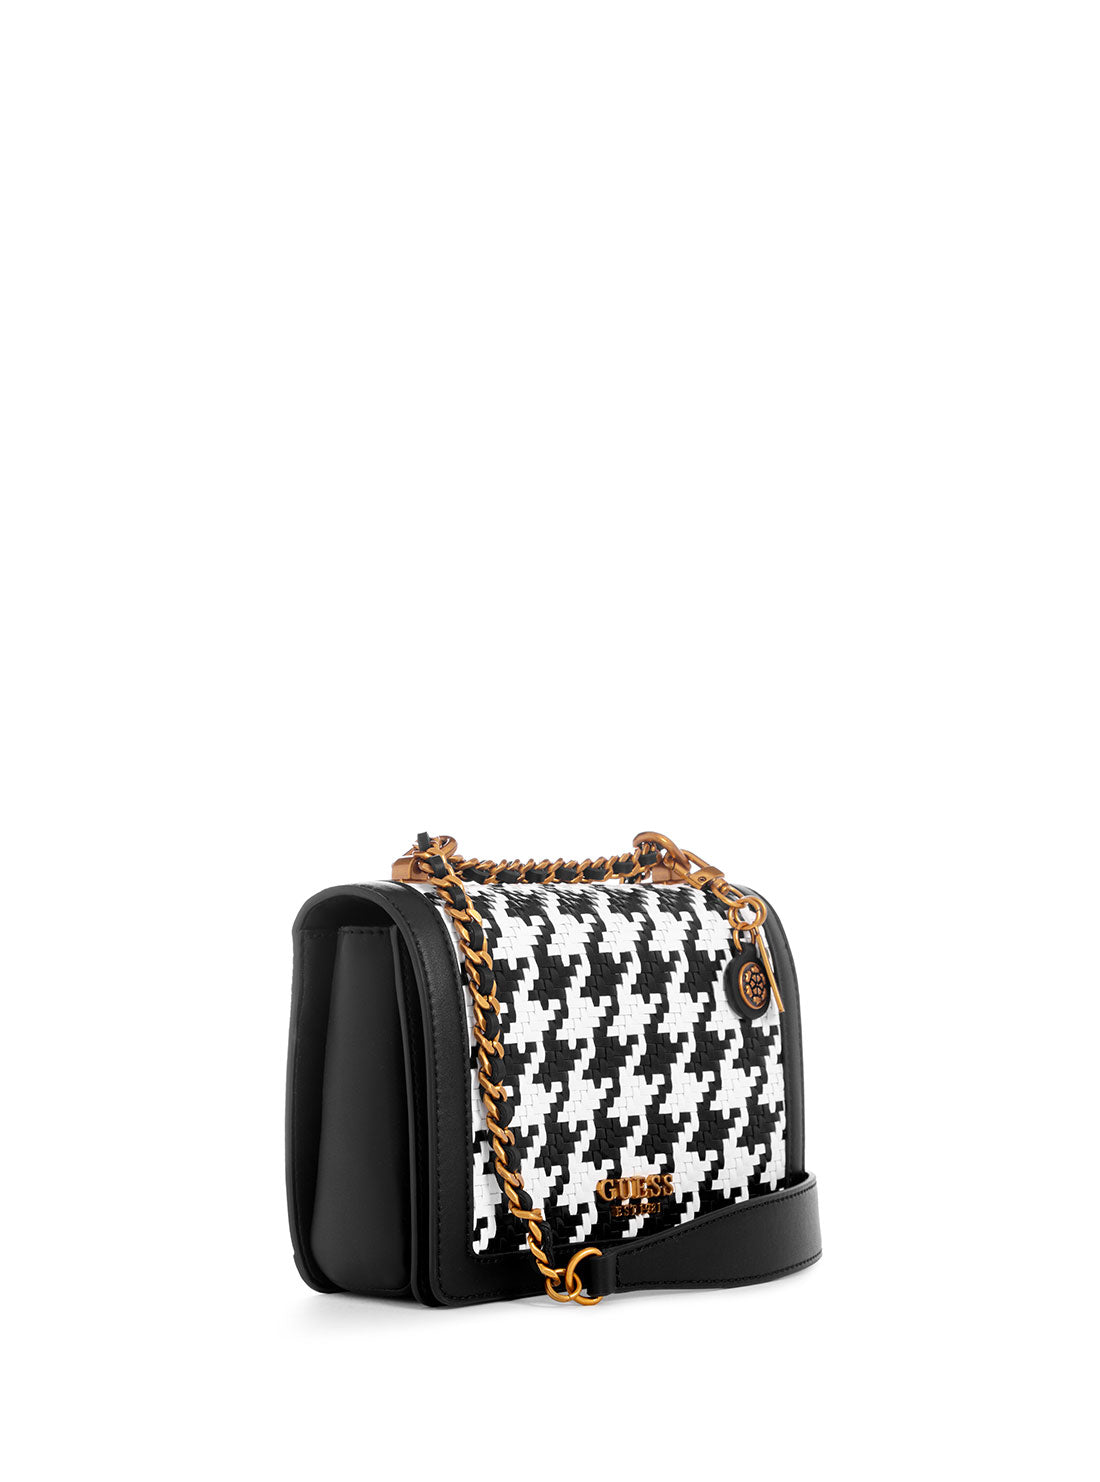 Buy GUESS US Abey Crossbody Fold Bag, Black, One Size at Amazon.in